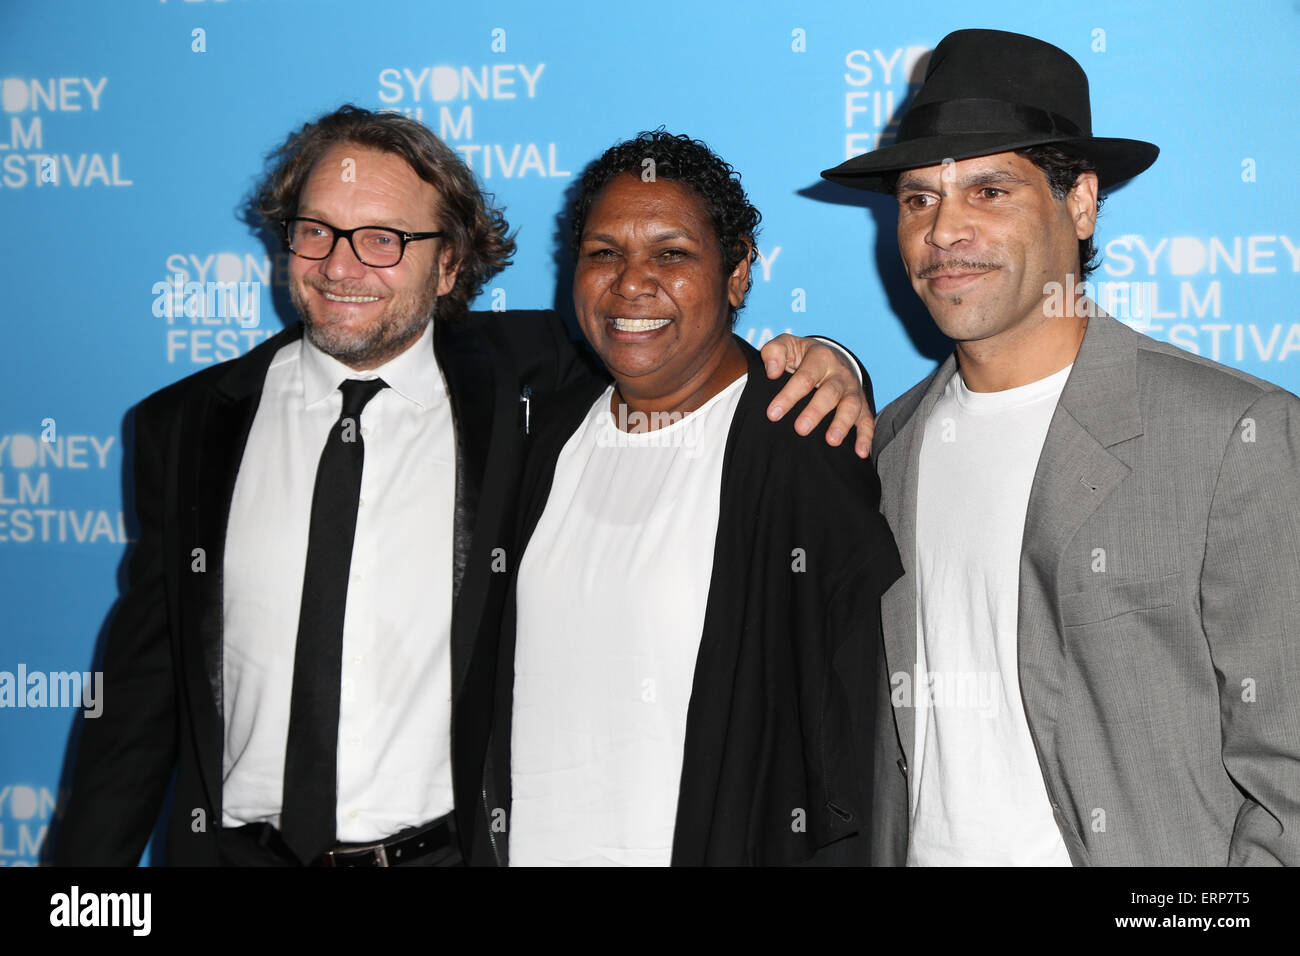 Sydney, Australia. 6 June 2015. Pictured: Director Jeremy Sims and actress Ningali Lawford. VIPs arrived on the red carpet for the Sydney Film Festival World Premiere of Last Cab to Darwin at the State Theatre, 49 Market Street, Sydney. Credit: Richard Milnes/Alamy Live News Stock Photo